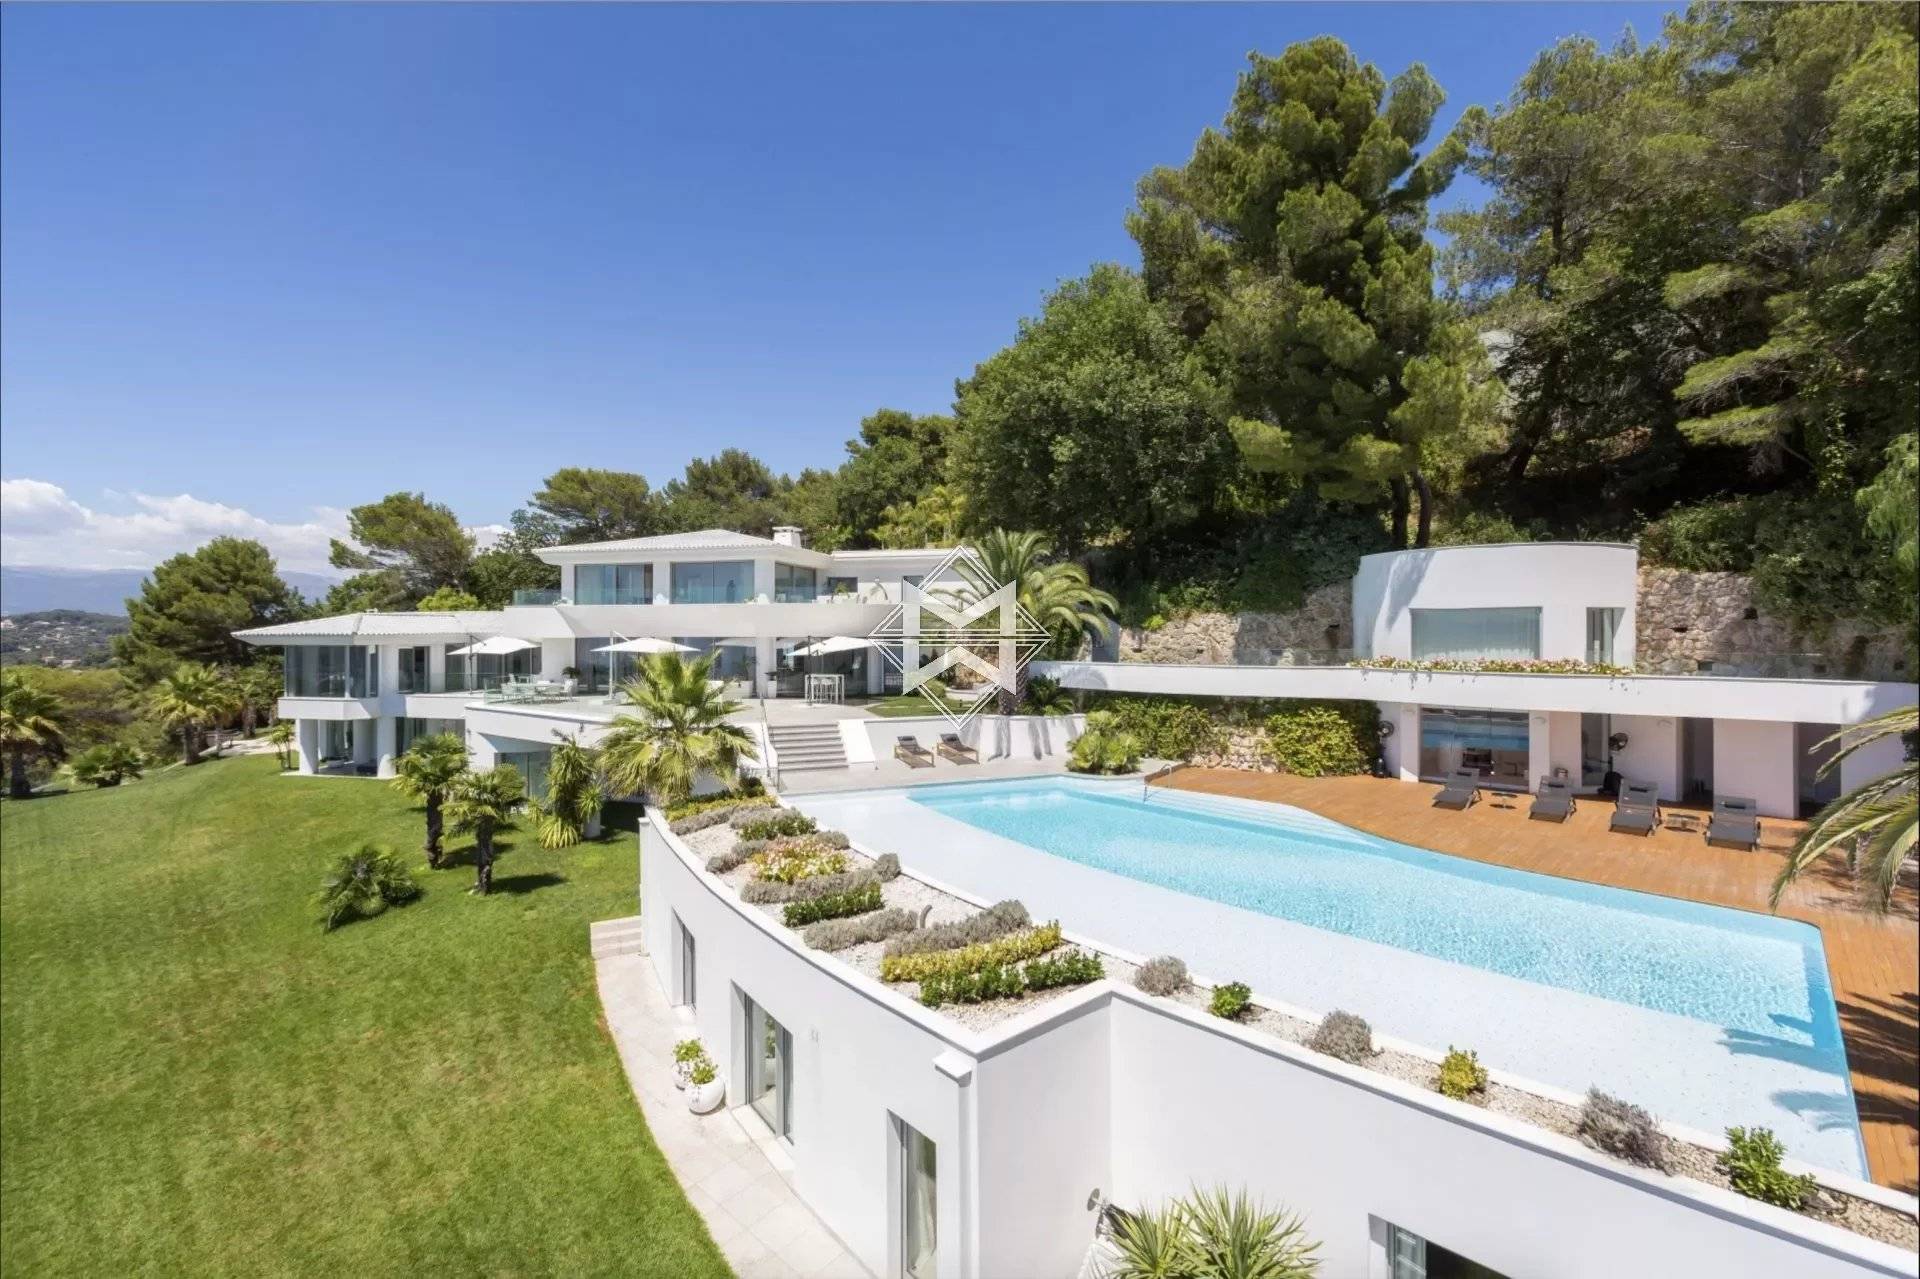 CANNES CALIFORNIE - Exceptional villa overlooking the bay of Cannes